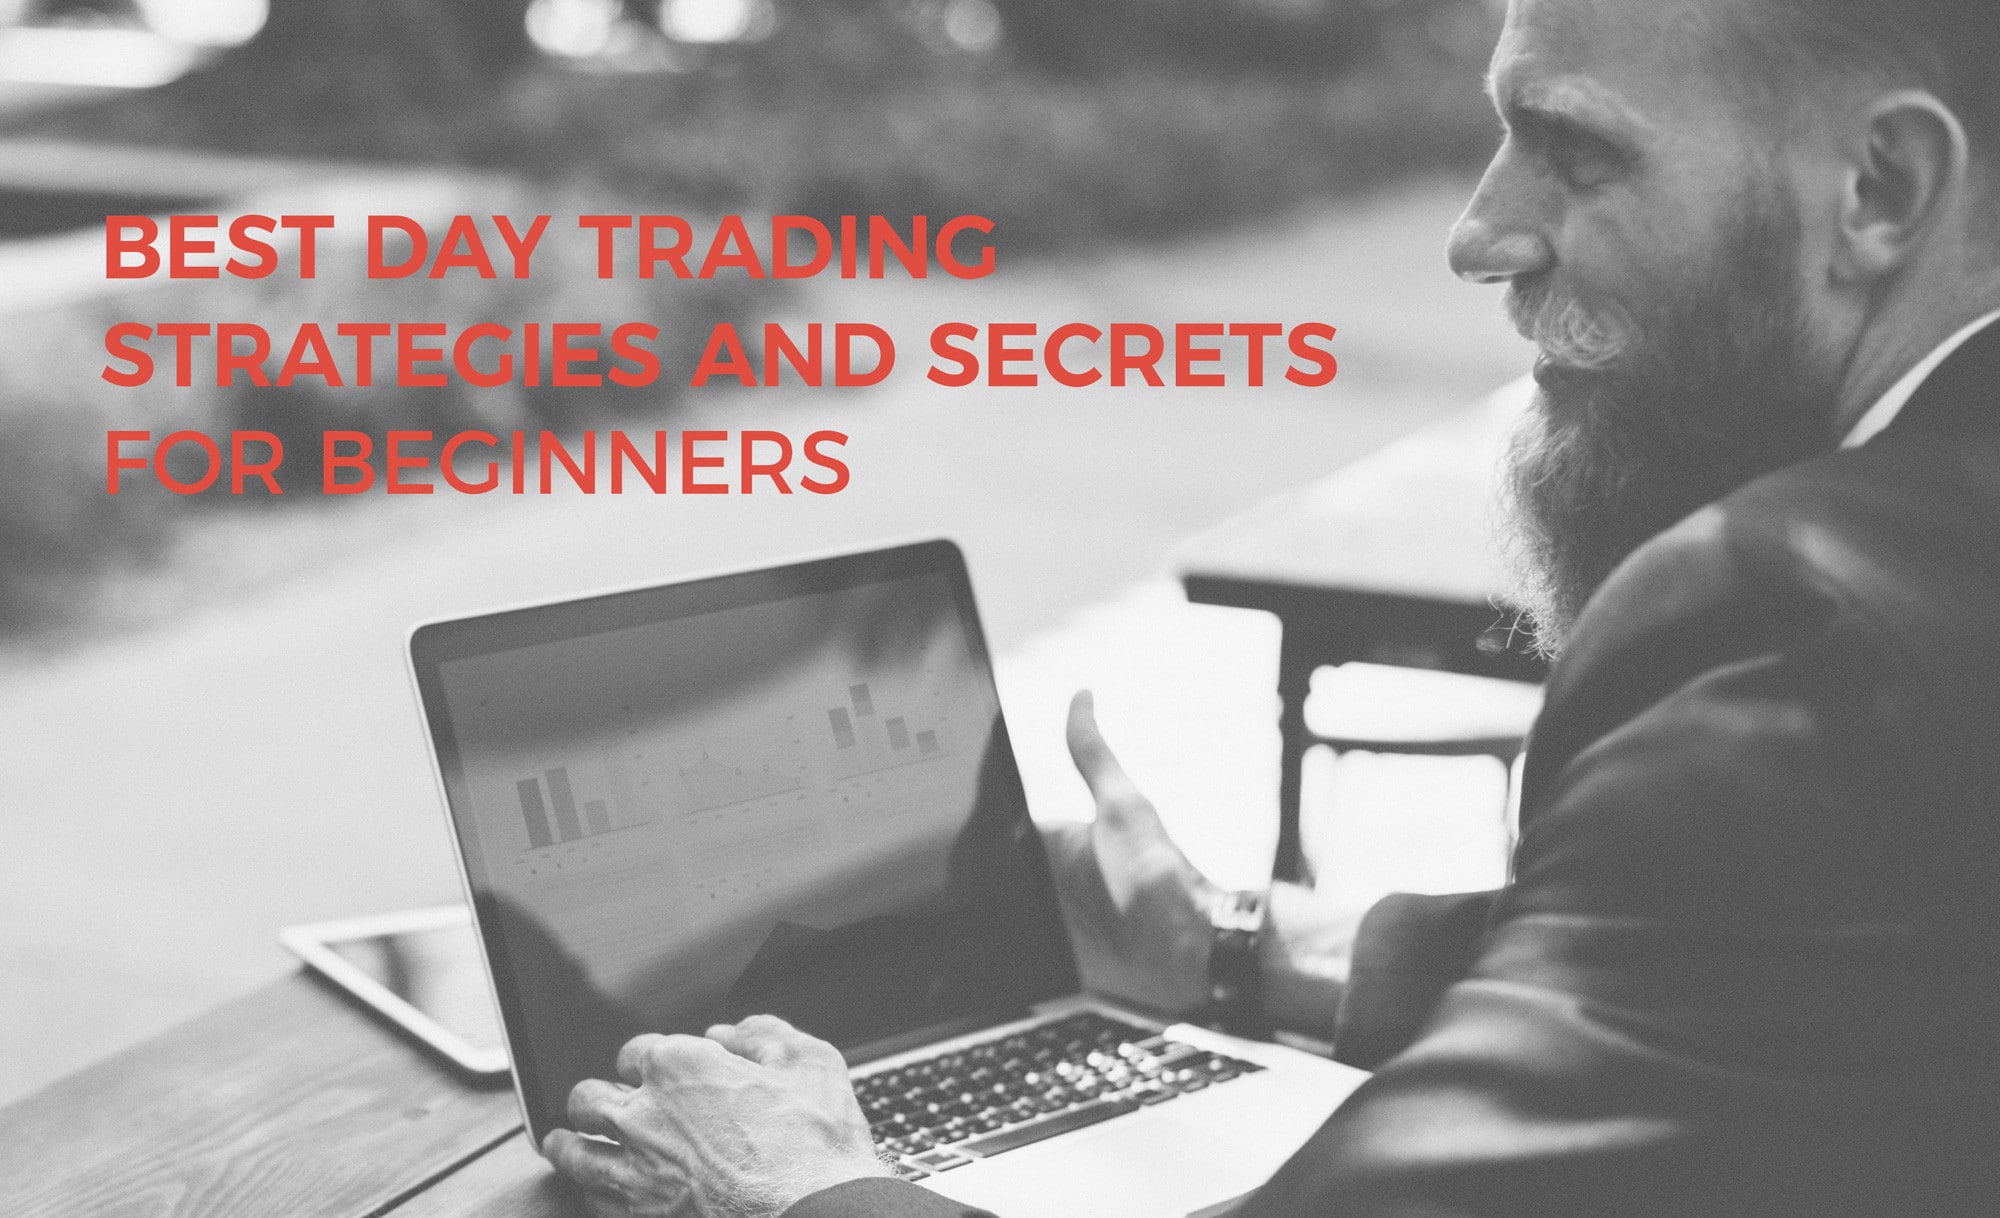 Best Day Trading Strategies and Secrets for Beginners